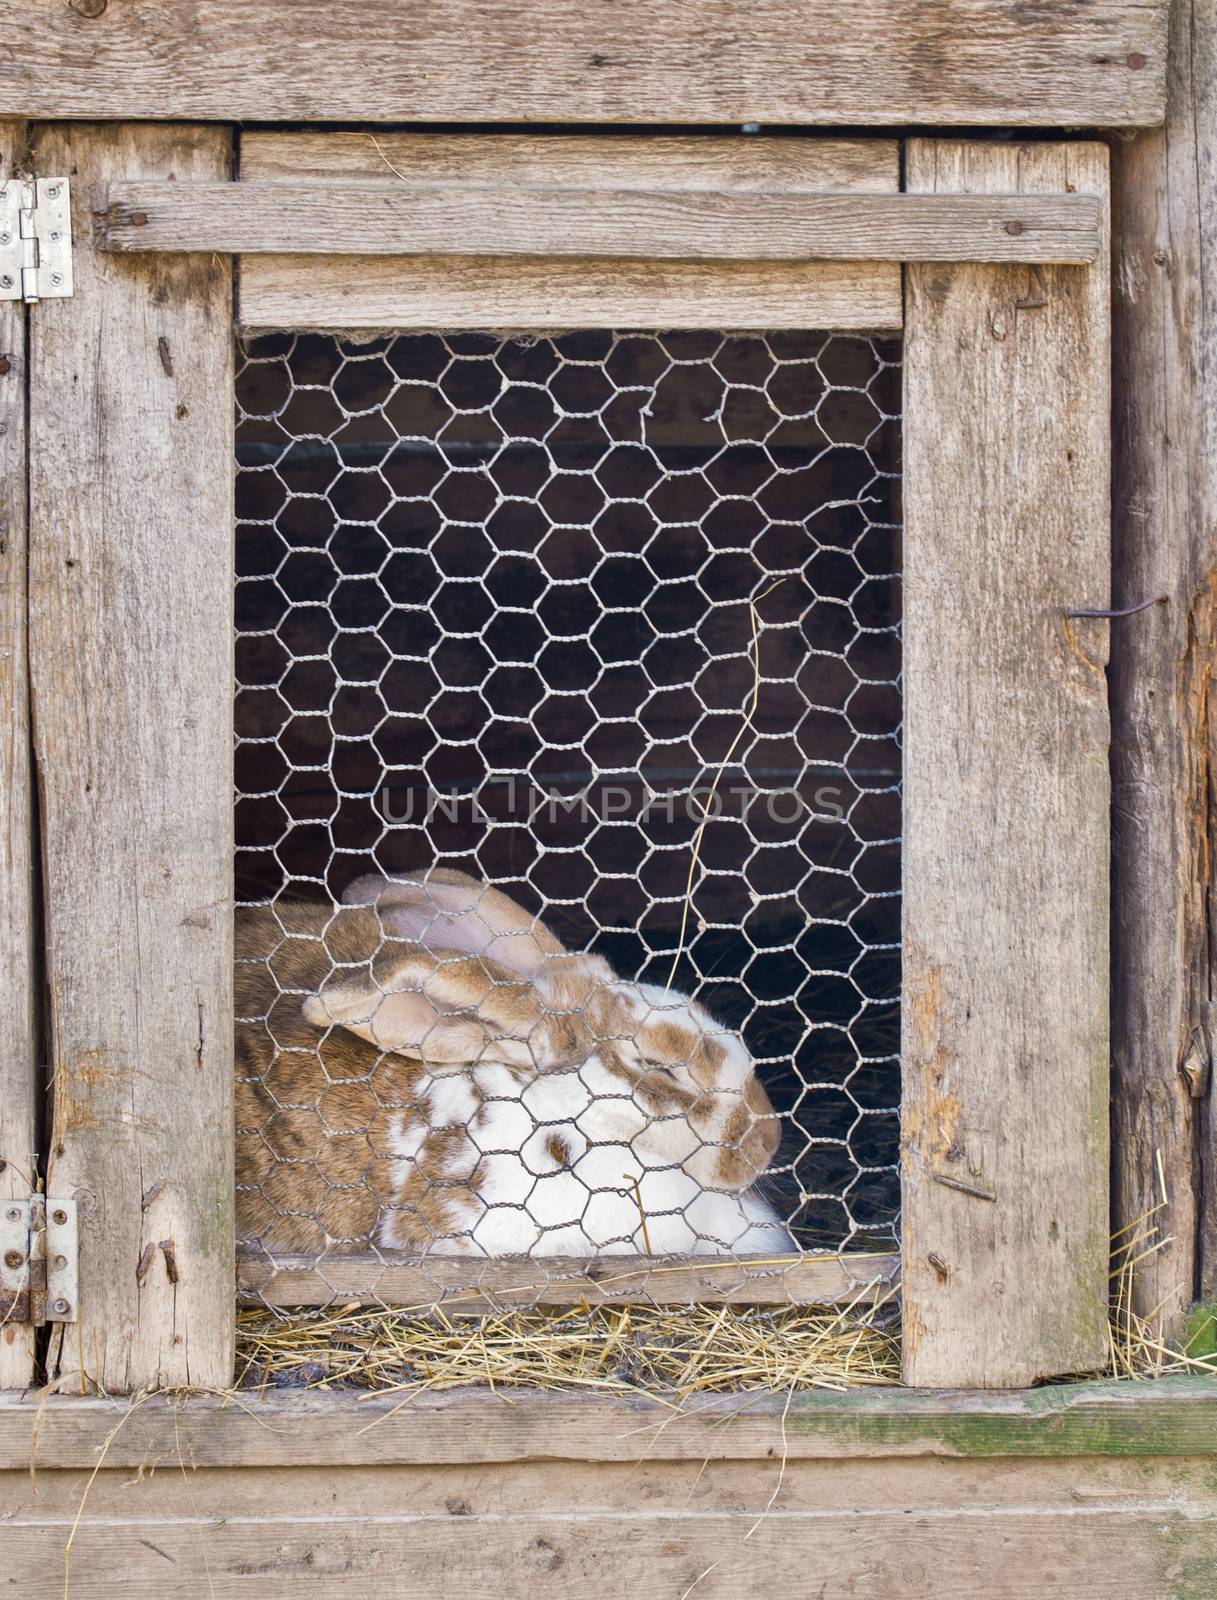 rabbit in cage by nejuras